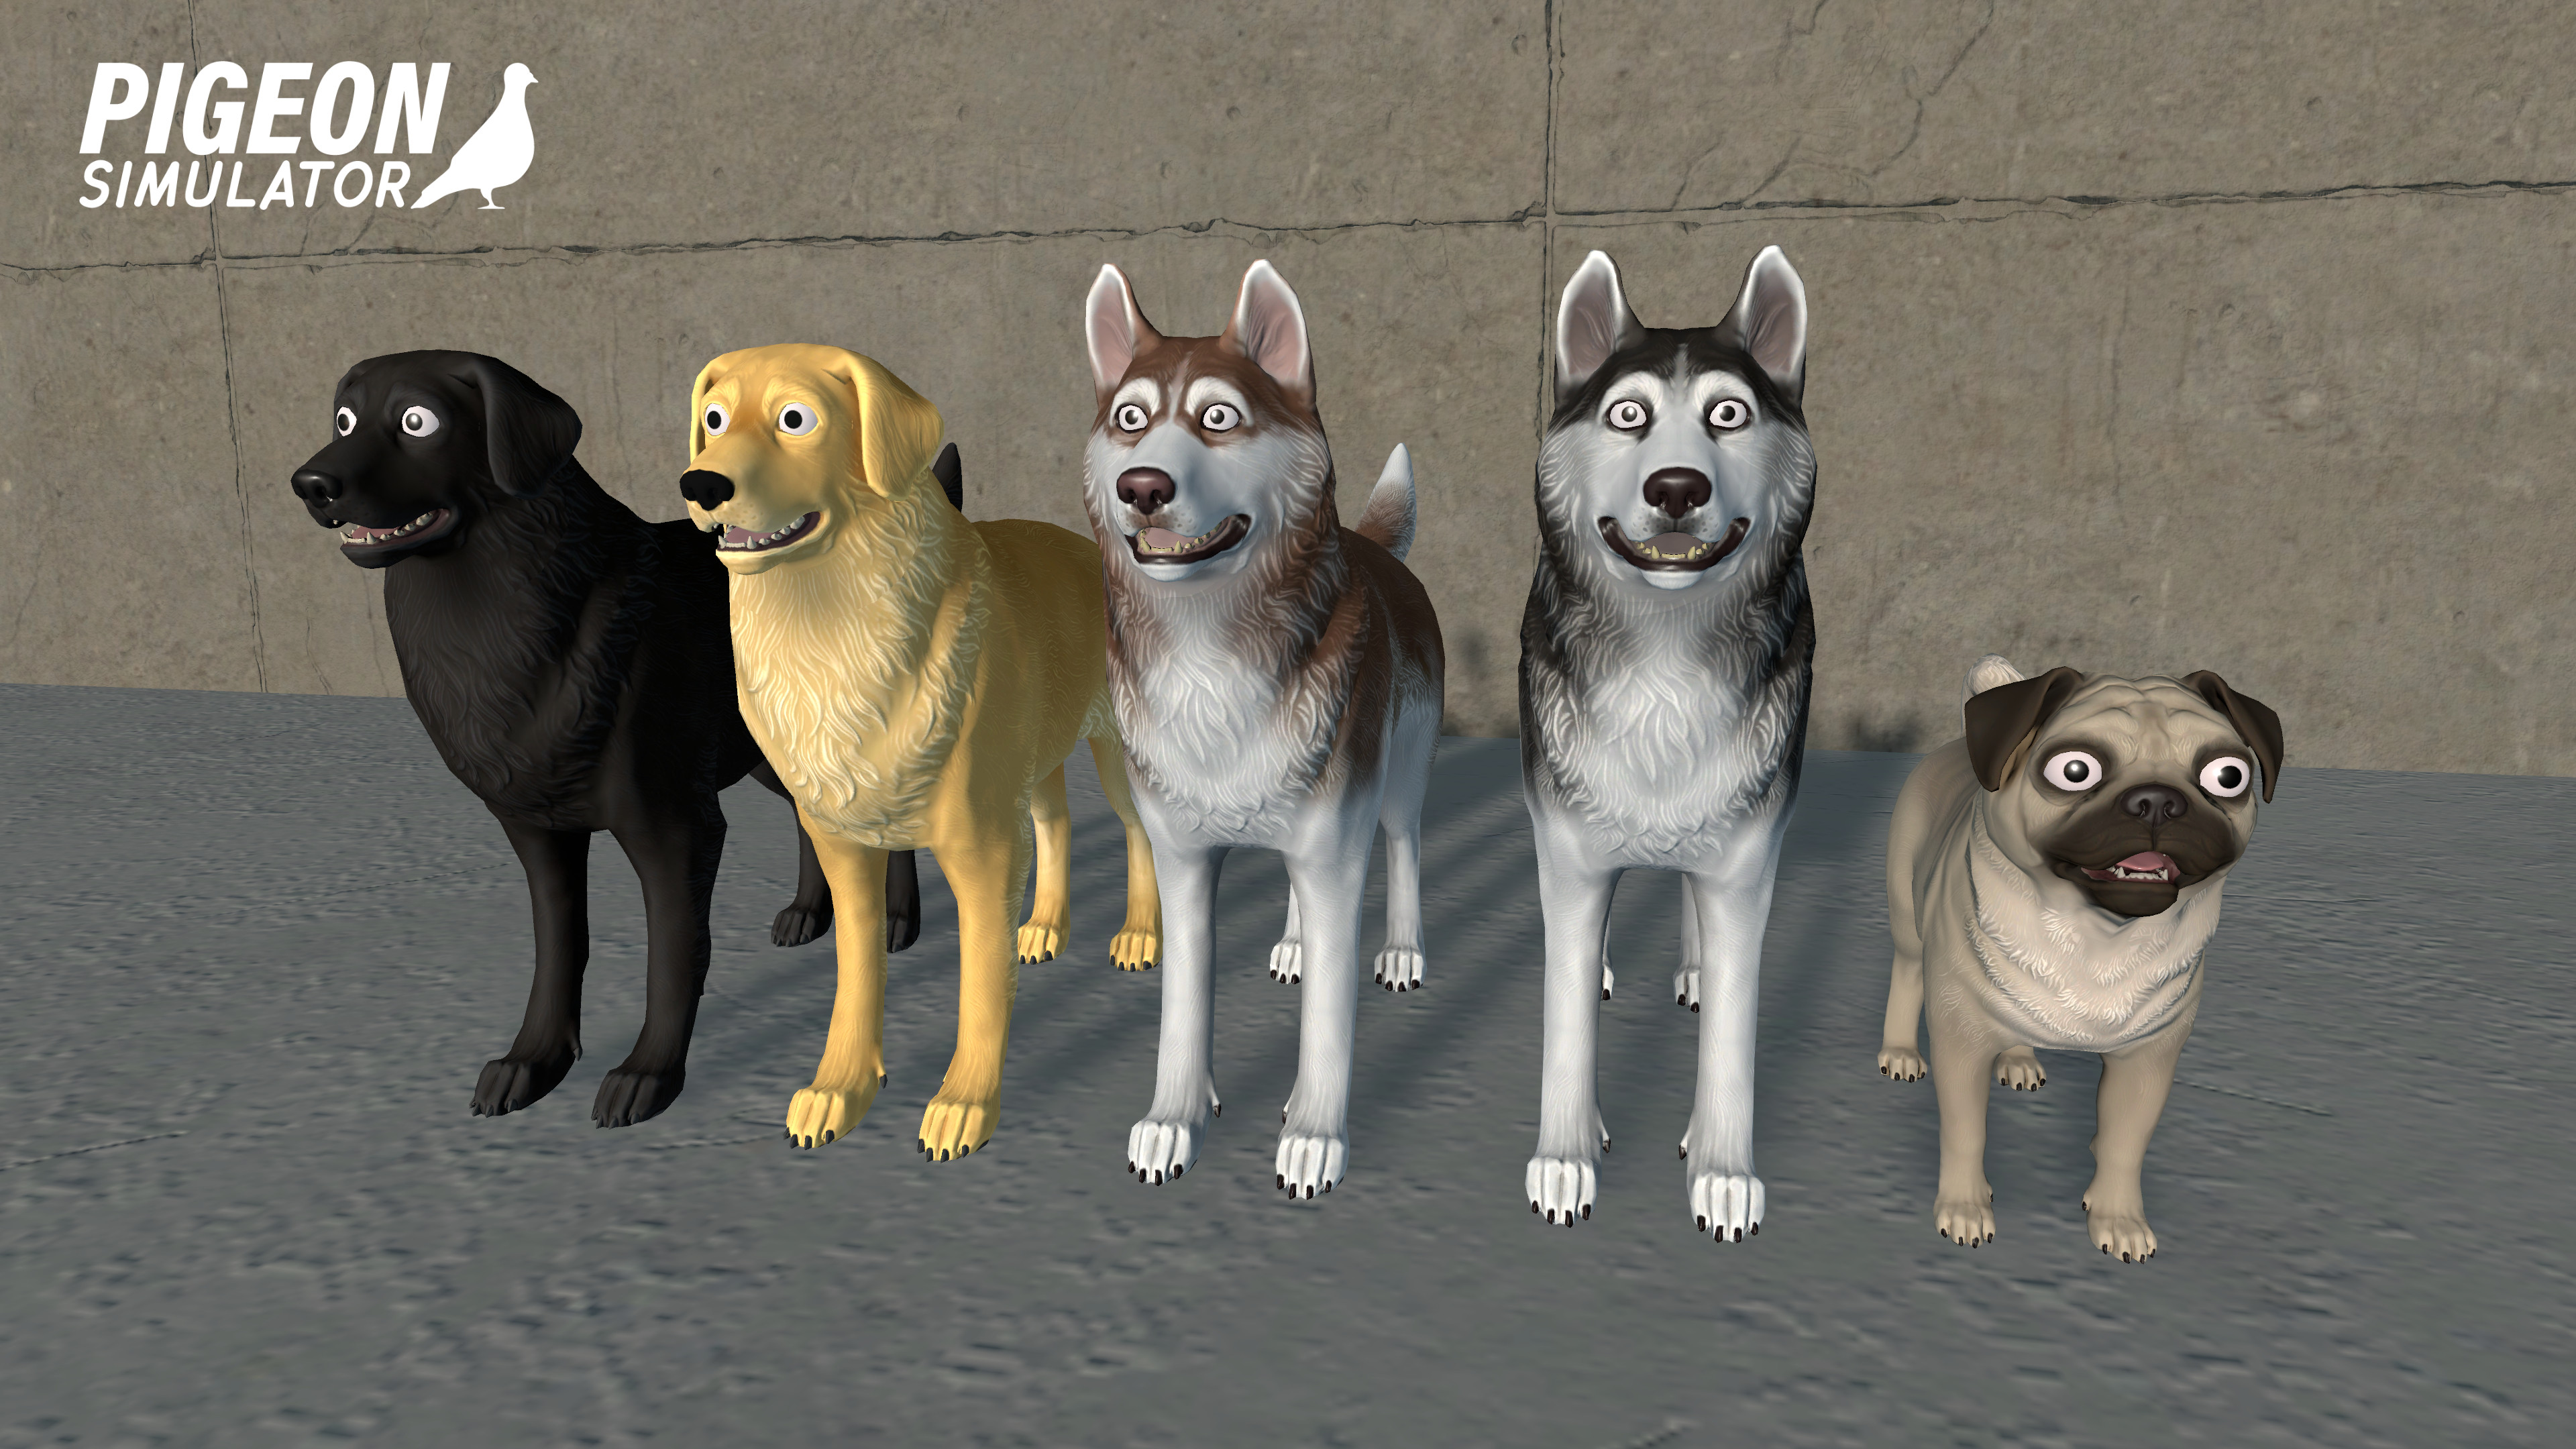 Other dog models - Retriever, Husky, and pug - and their variations. I planned on adding more material variations for each to this starting set